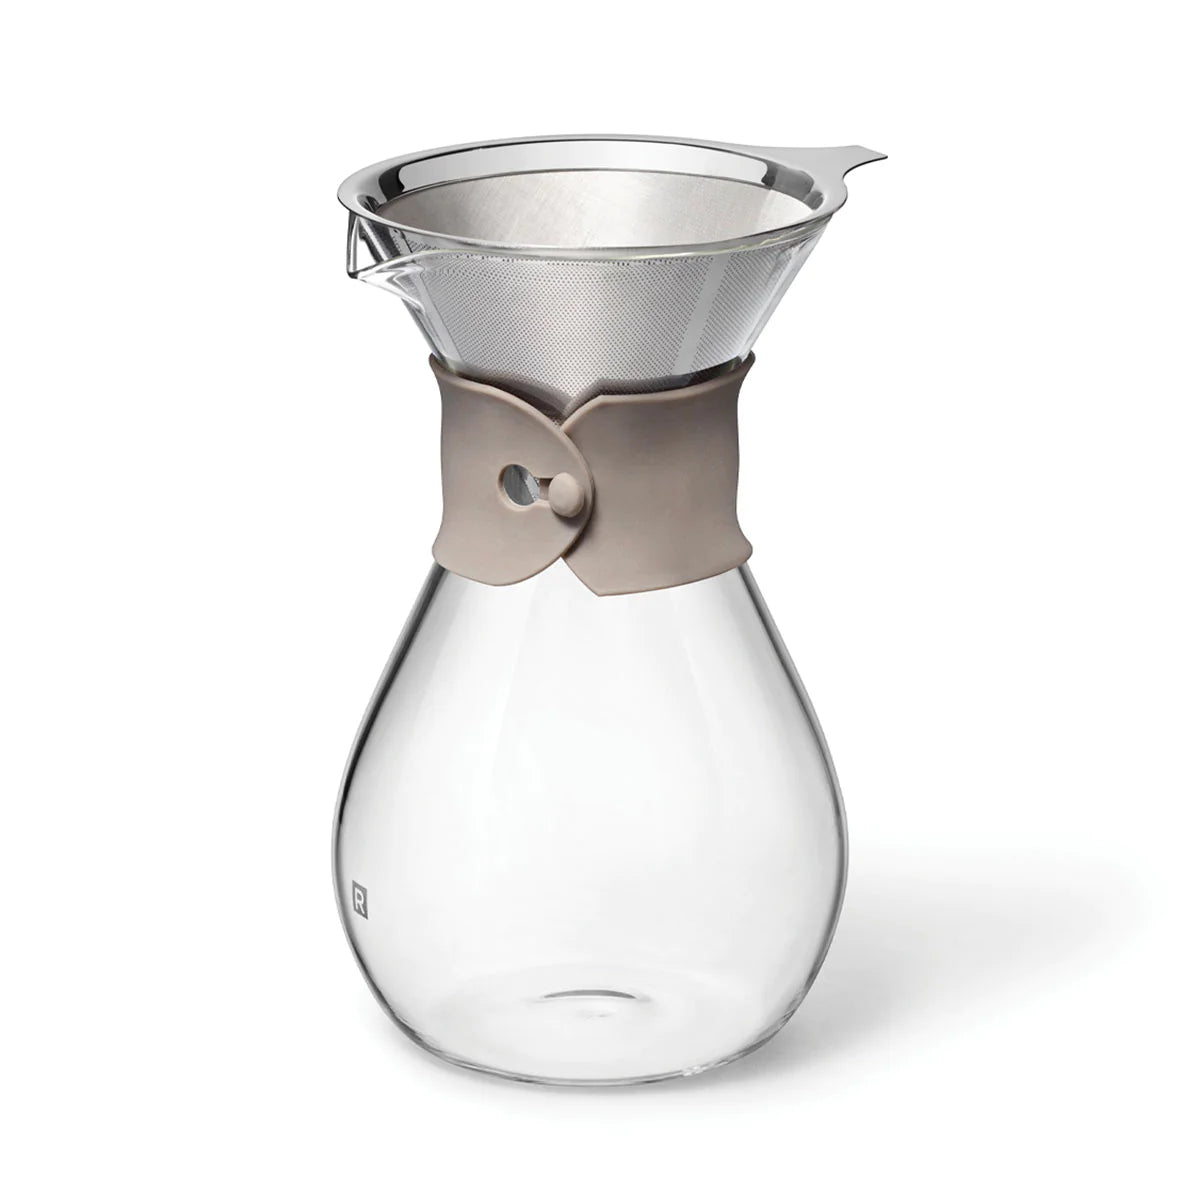 Glass Pour-Over Coffee Maker, 1.2 L, by Ricardo